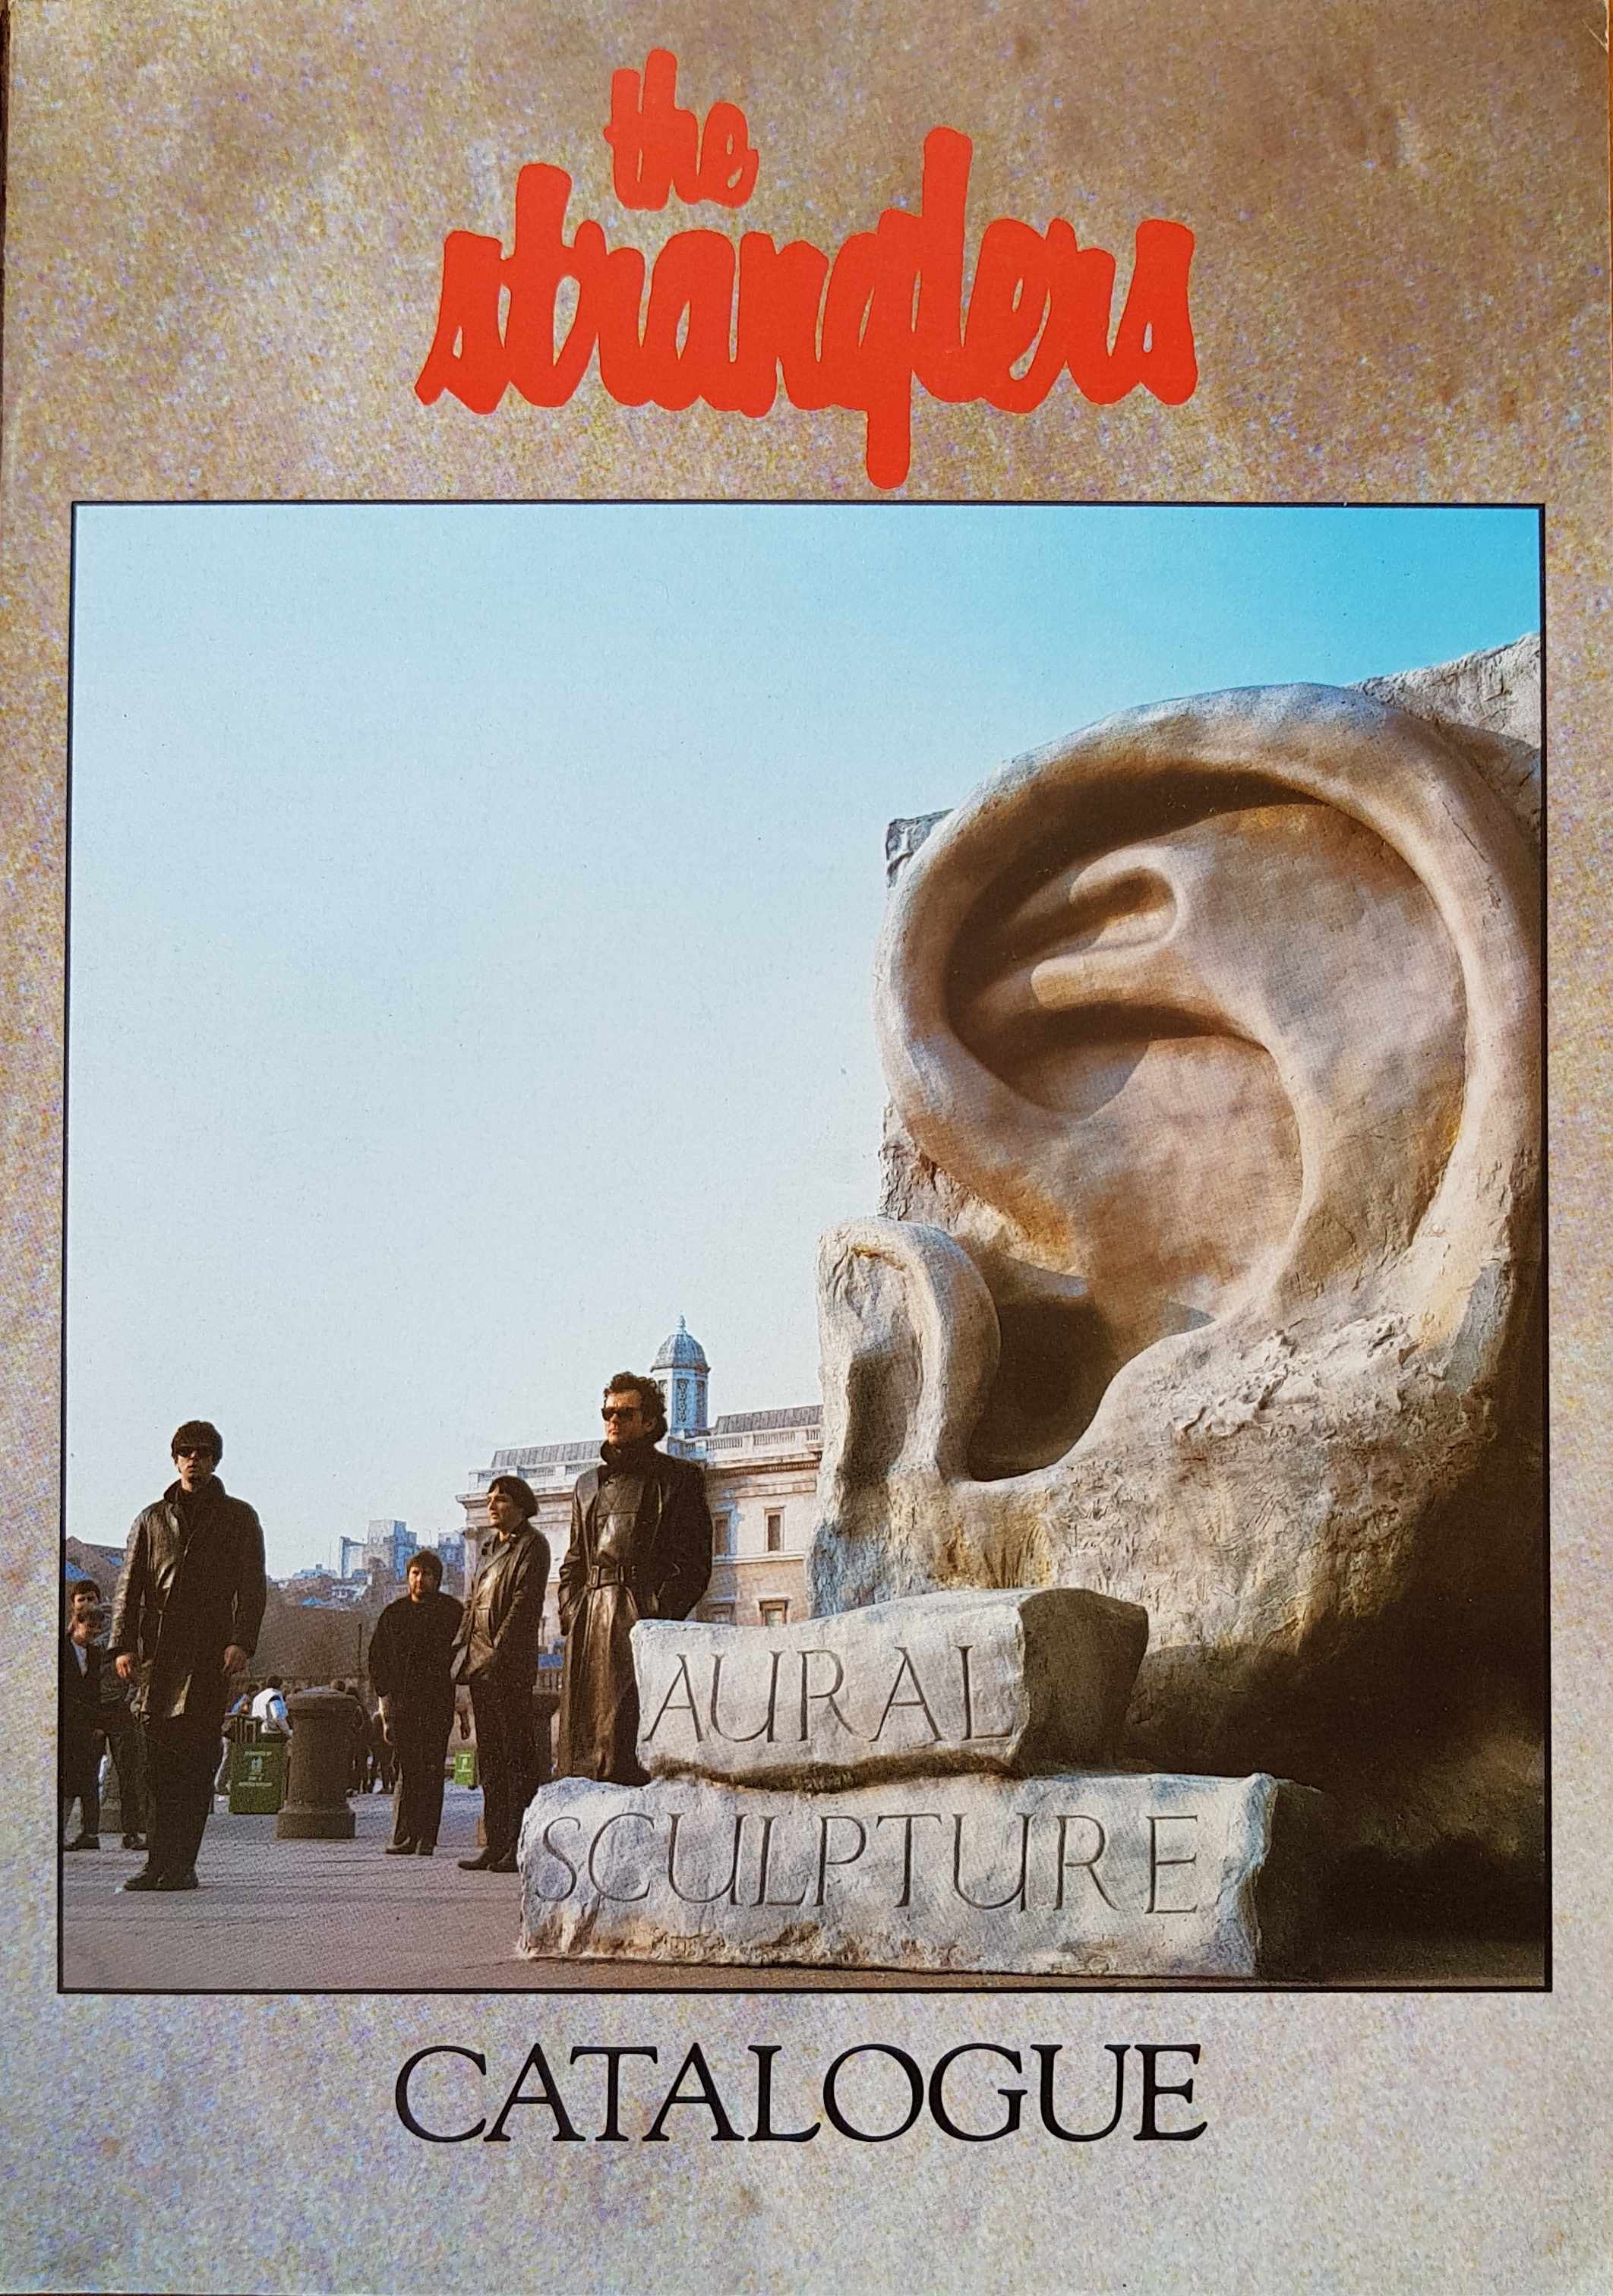 Picture of Books-ASCAT Aural sculpture catalogue by artist The Stranglers  from The Stranglers books